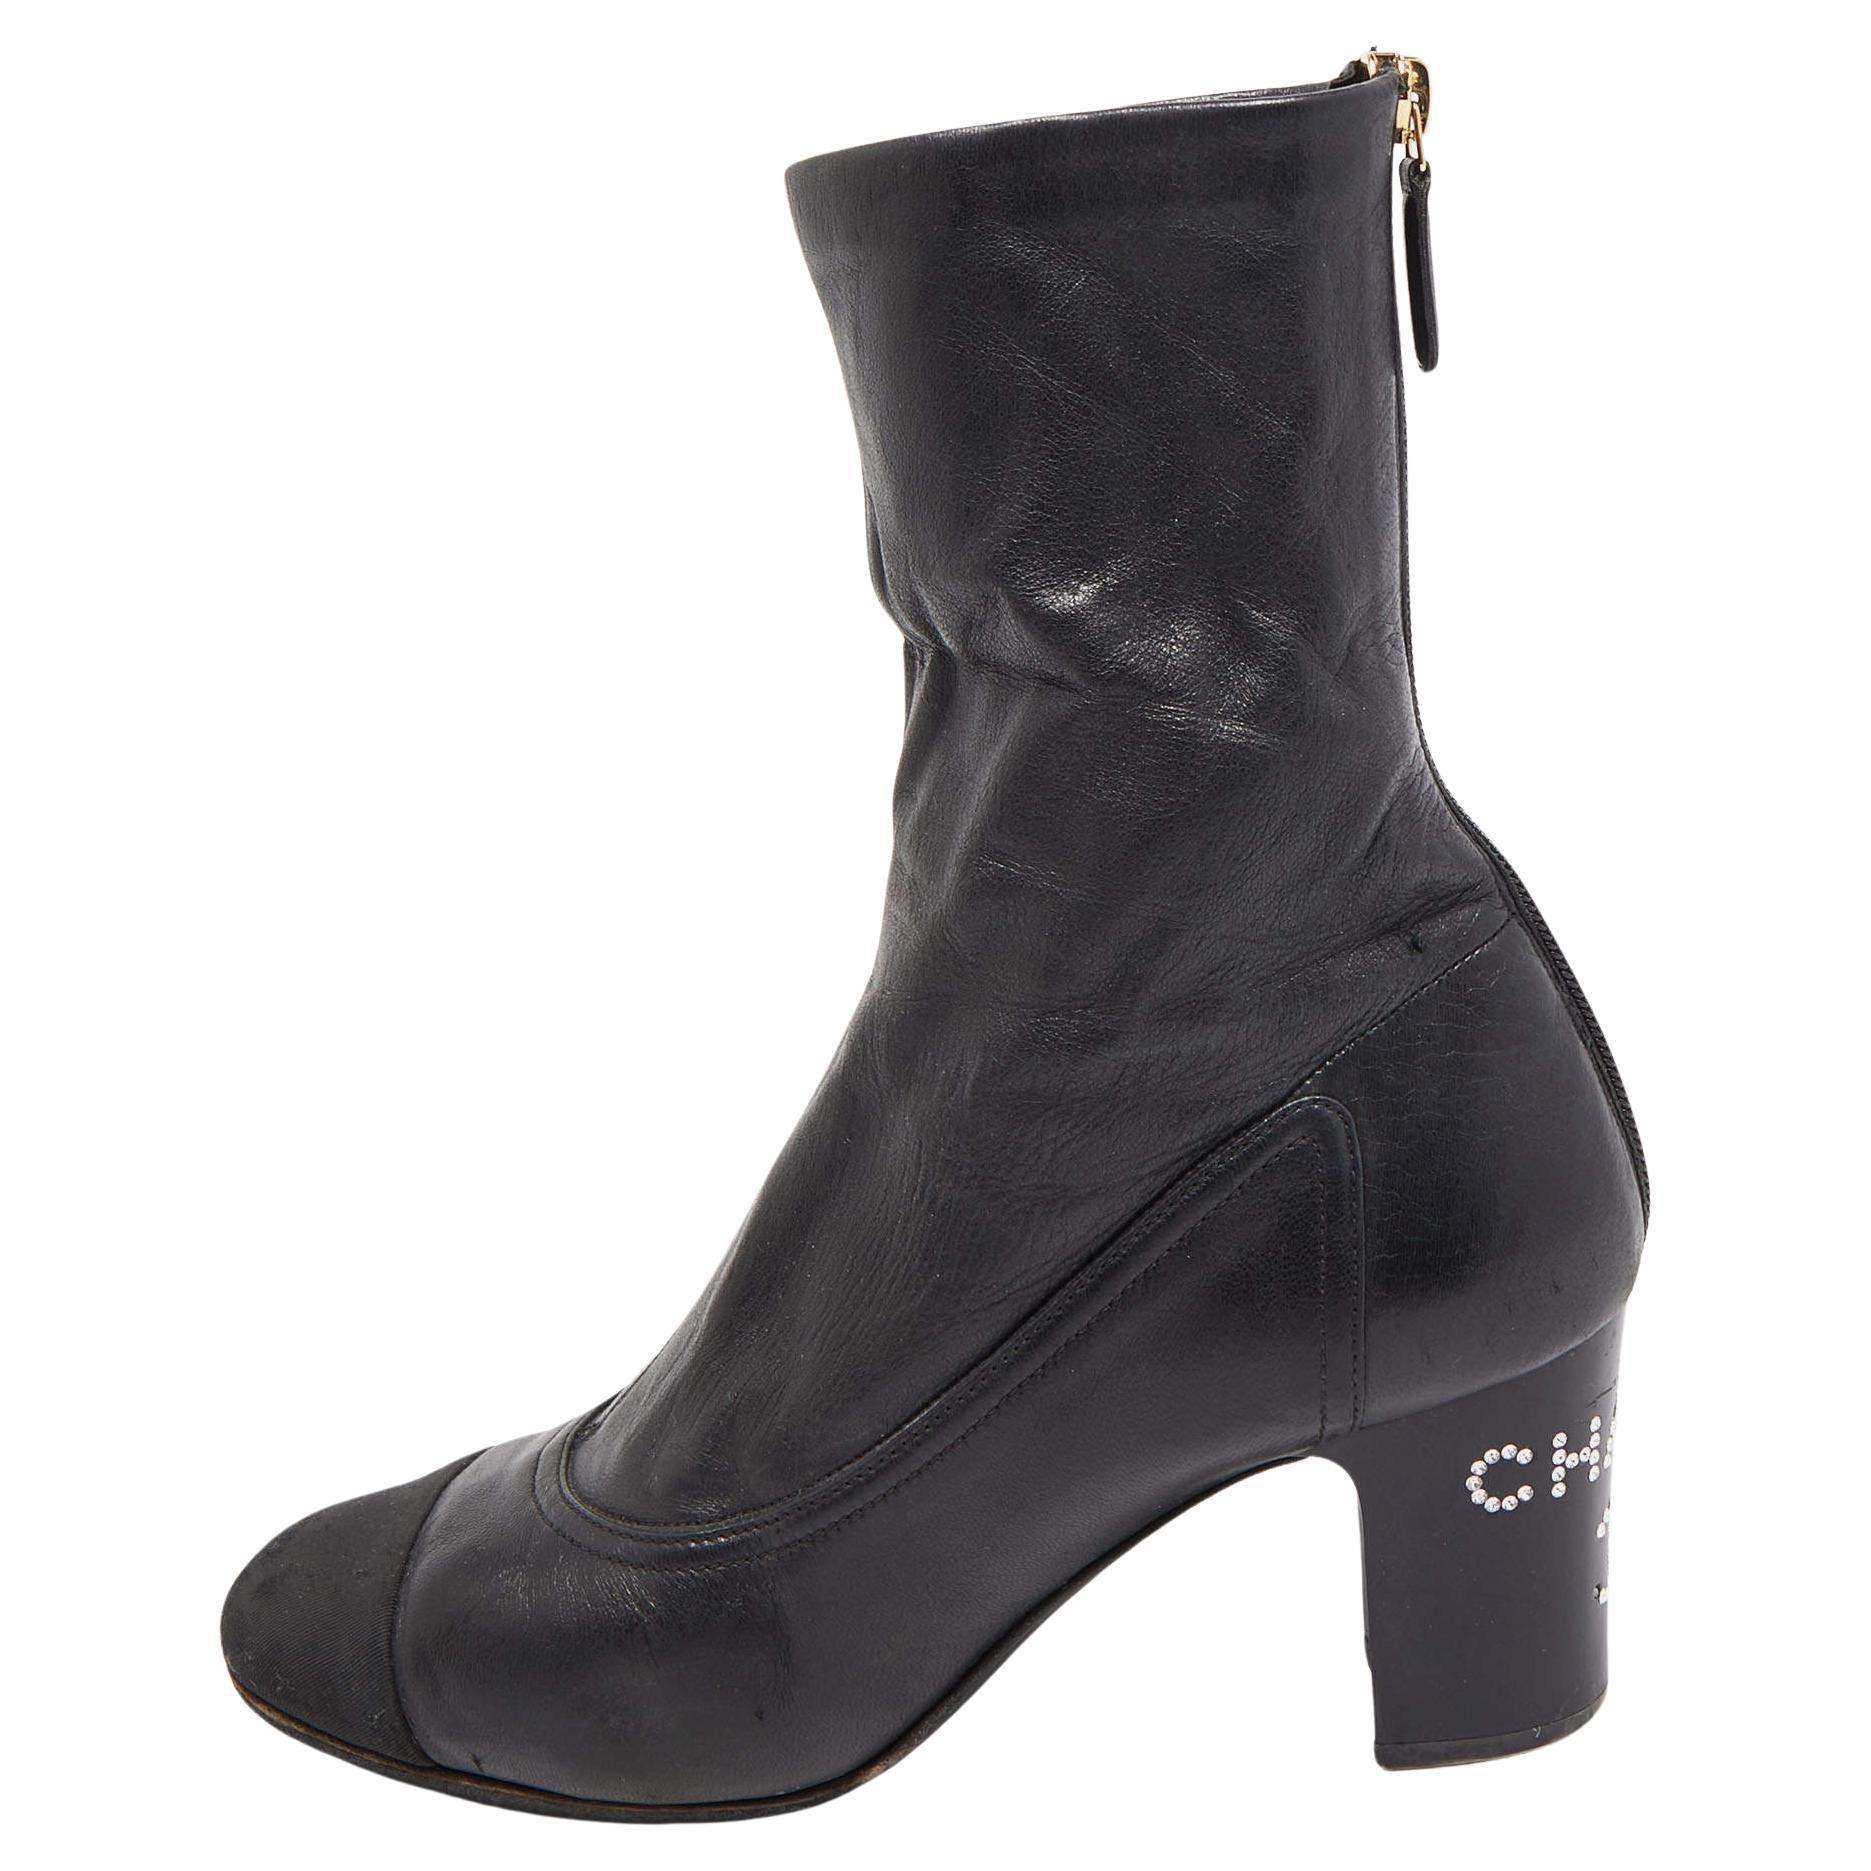 Chanel Black Leather Round Toe Wedge Boots Size 39.5 Chanel